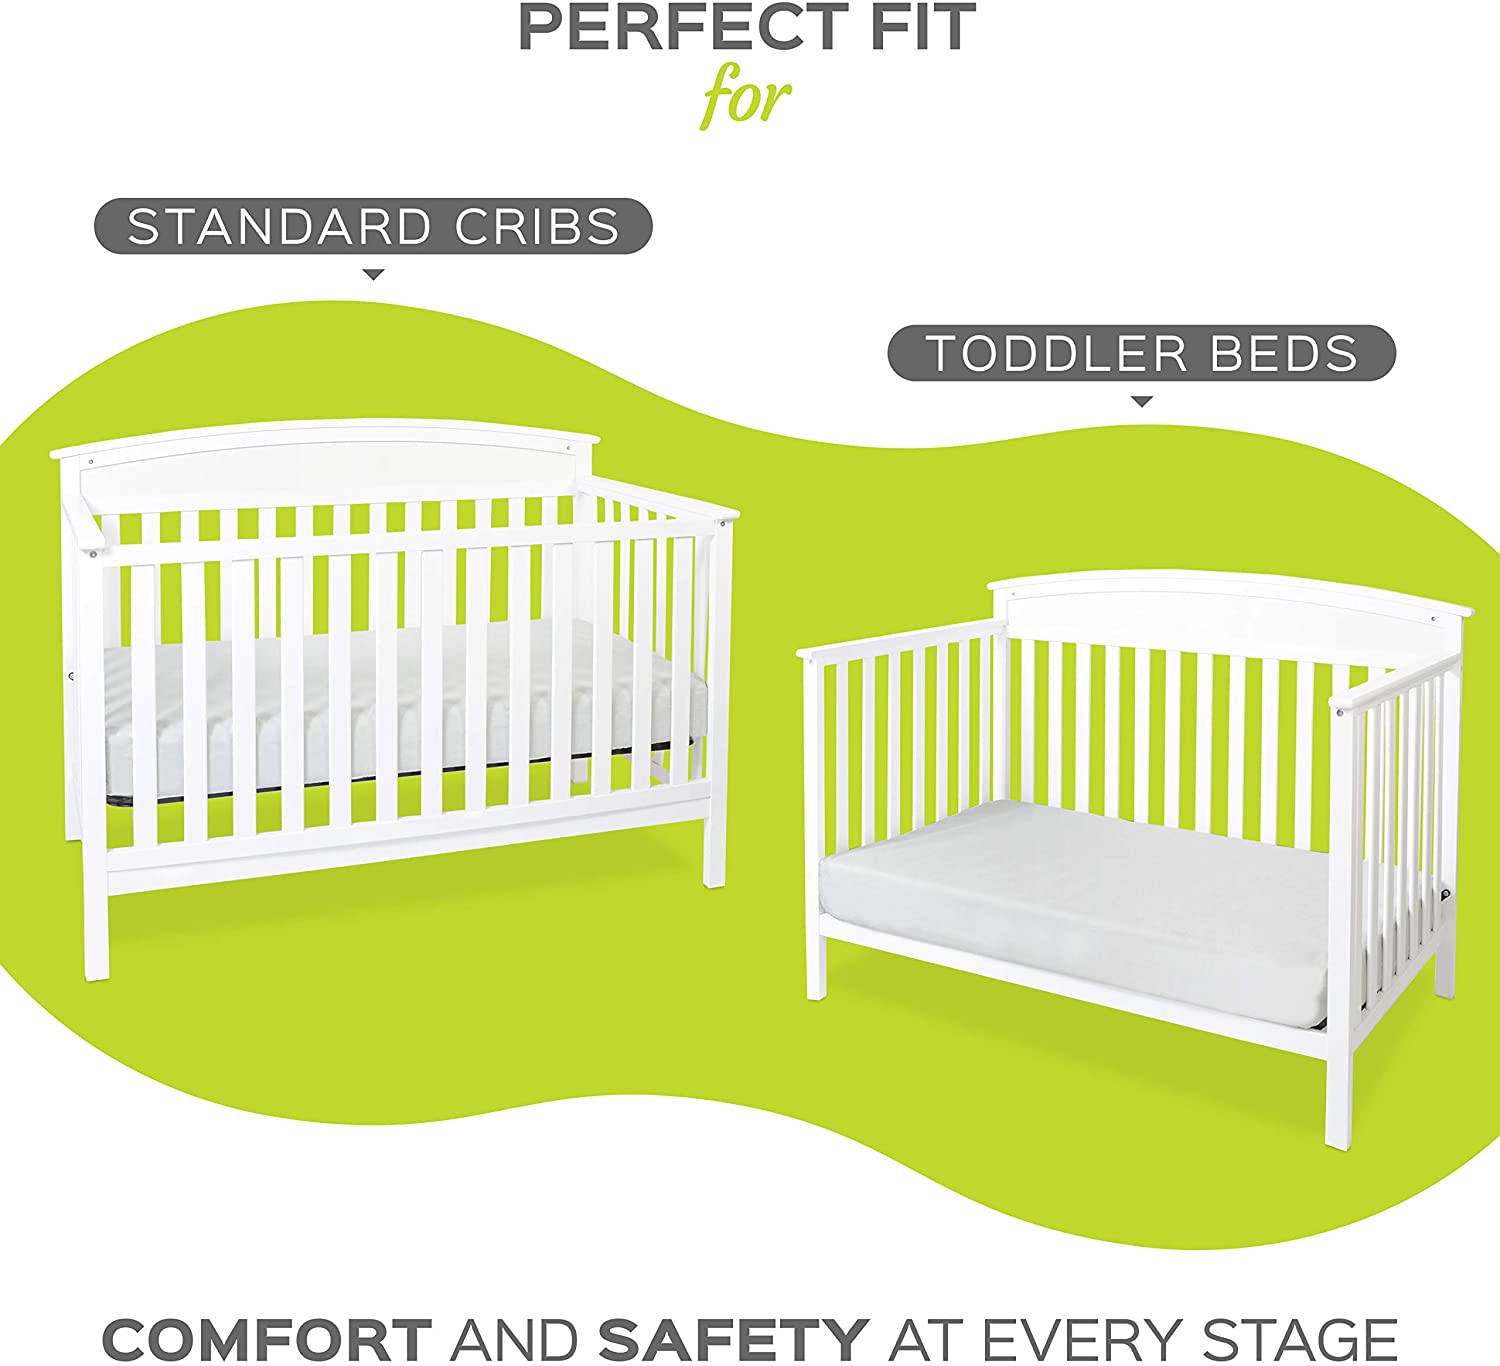 Milliard Crib Mattress, Flip Technology, Firm Side for Baby and Soft Side for Toddler - 100% Cotton Cover